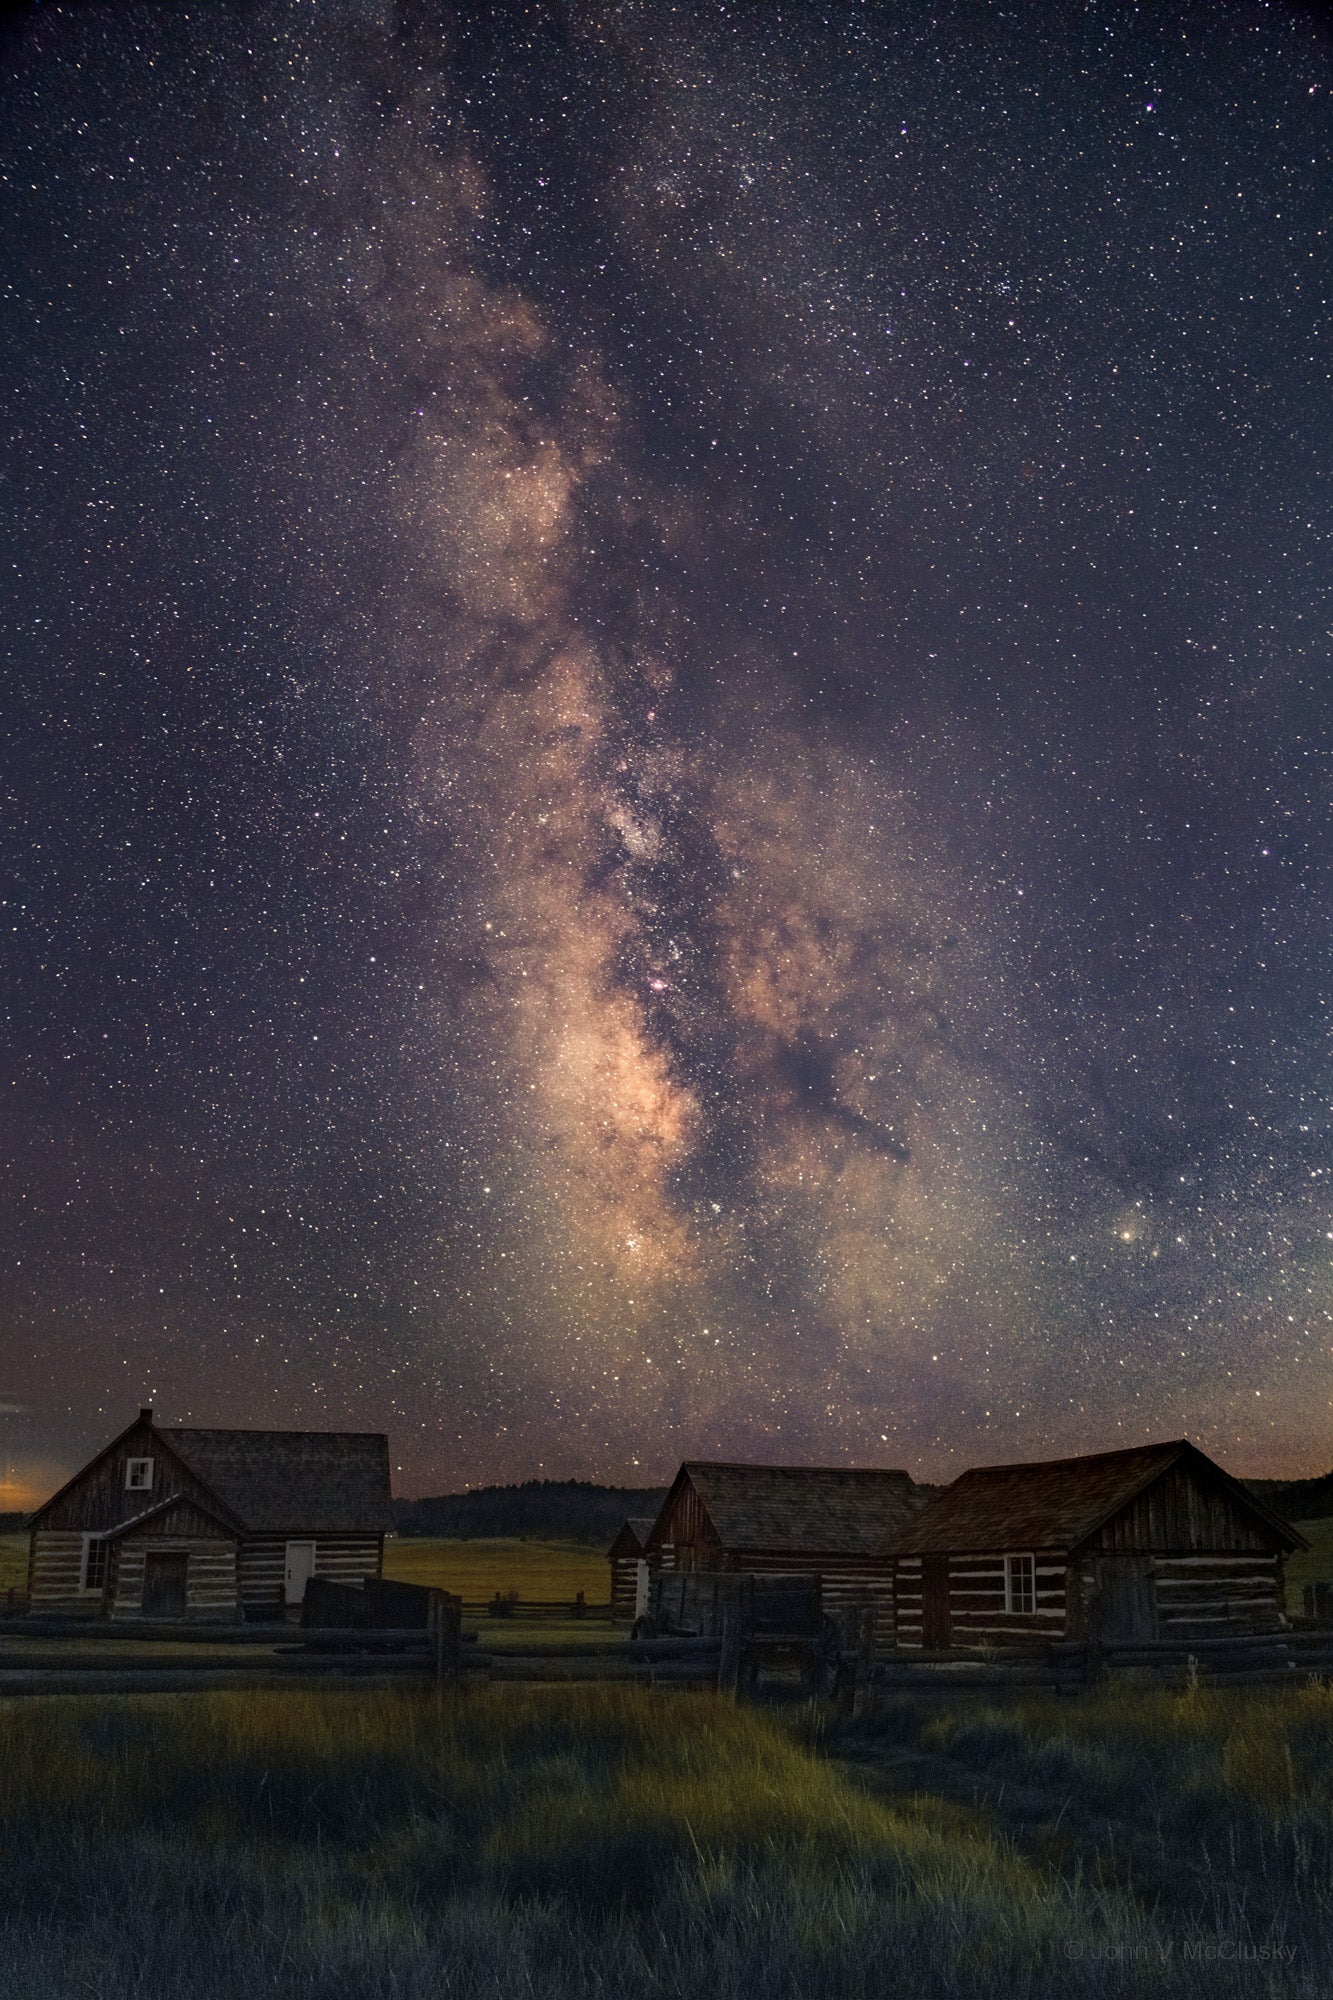 The stars light the Hornbeck Homestead while the Milky Way glows in the night sky in this landscape photography print from the Florissant Fossil Bed National Monument.